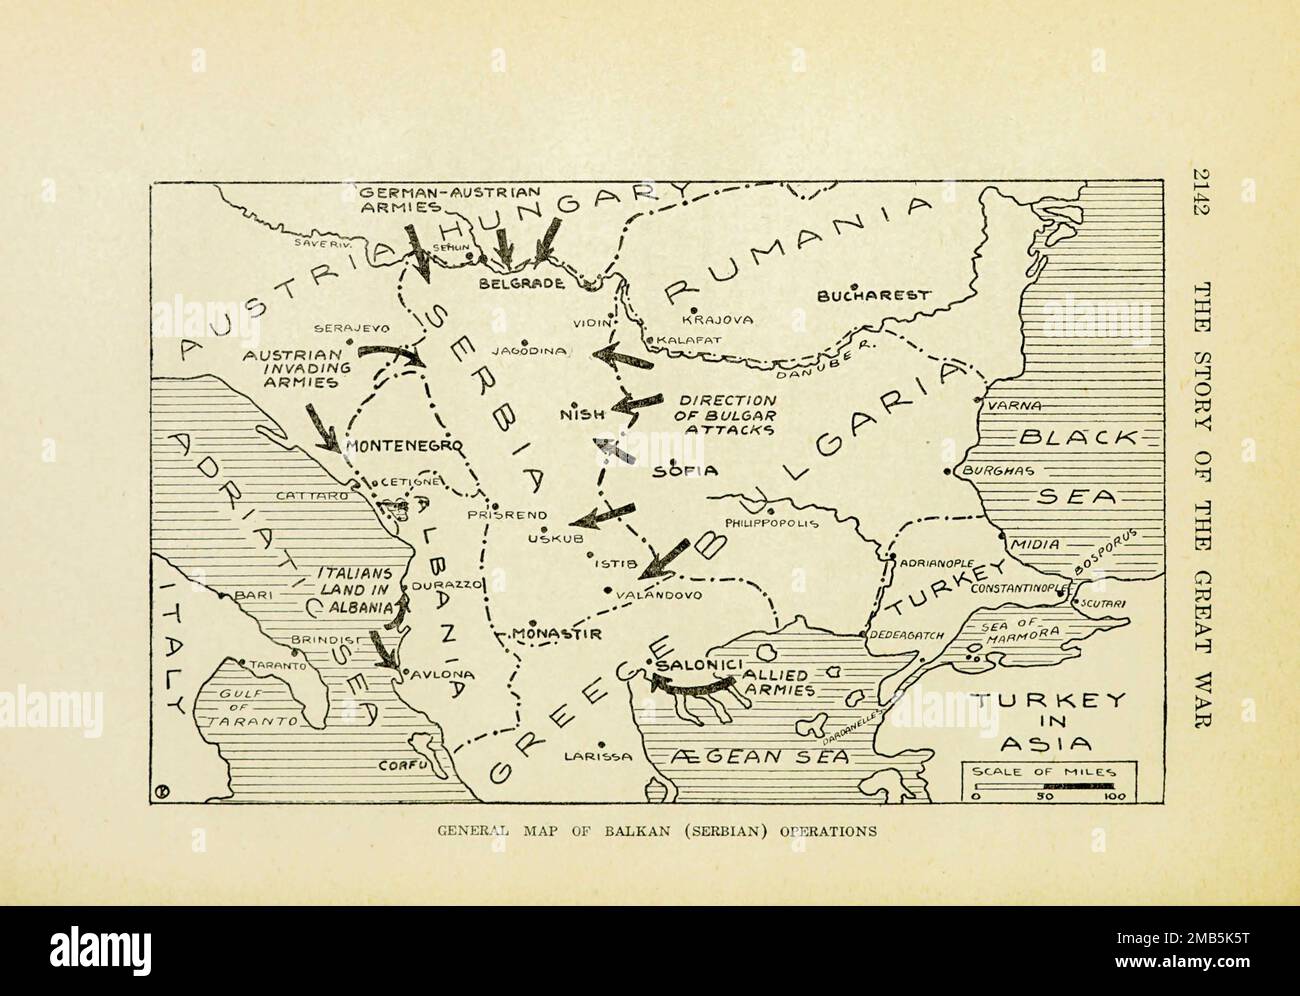 General Map of Balkan (Serbian) Operations, from the book The story of the great war; the complete historical records of events to date DIPLOMATIC AND STATE PAPERS by Reynolds, Francis Joseph, 1867-1937; Churchill, Allen Leon; Miller, Francis Trevelyan, 1877-1959; Wood, Leonard, 1860-1927; Knight, Austin Melvin, 1854-1927; Palmer, Frederick, 1873-1958; Simonds, Frank Herbert, 1878-; Ruhl, Arthur Brown, 1876-  Volume VII Published 1920 Stock Photo